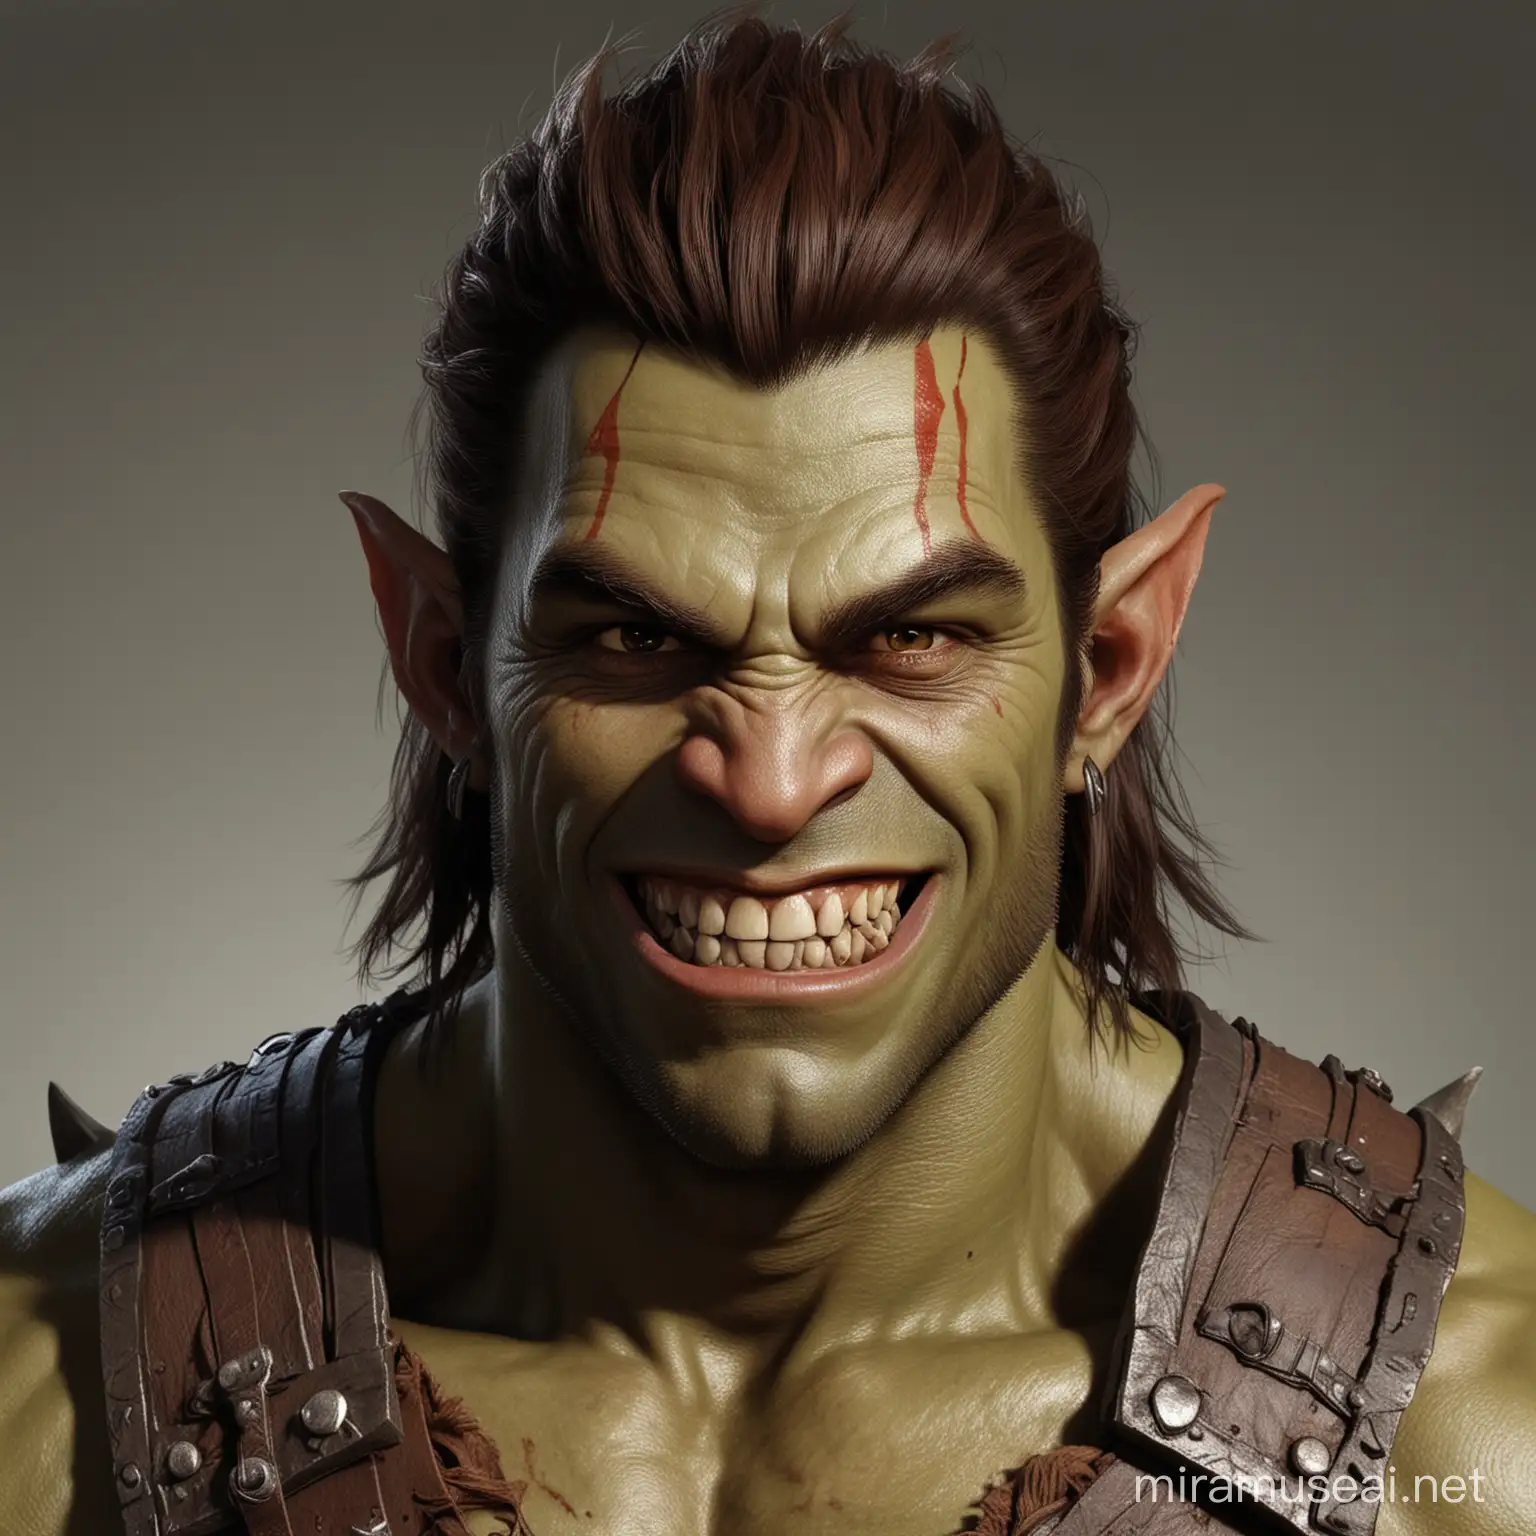 half orc missing tusk or tooth
fury type haircut redish brown hair
male
smiling
bigger tusks
give me more orc!
just finished a hard fight and is delighted